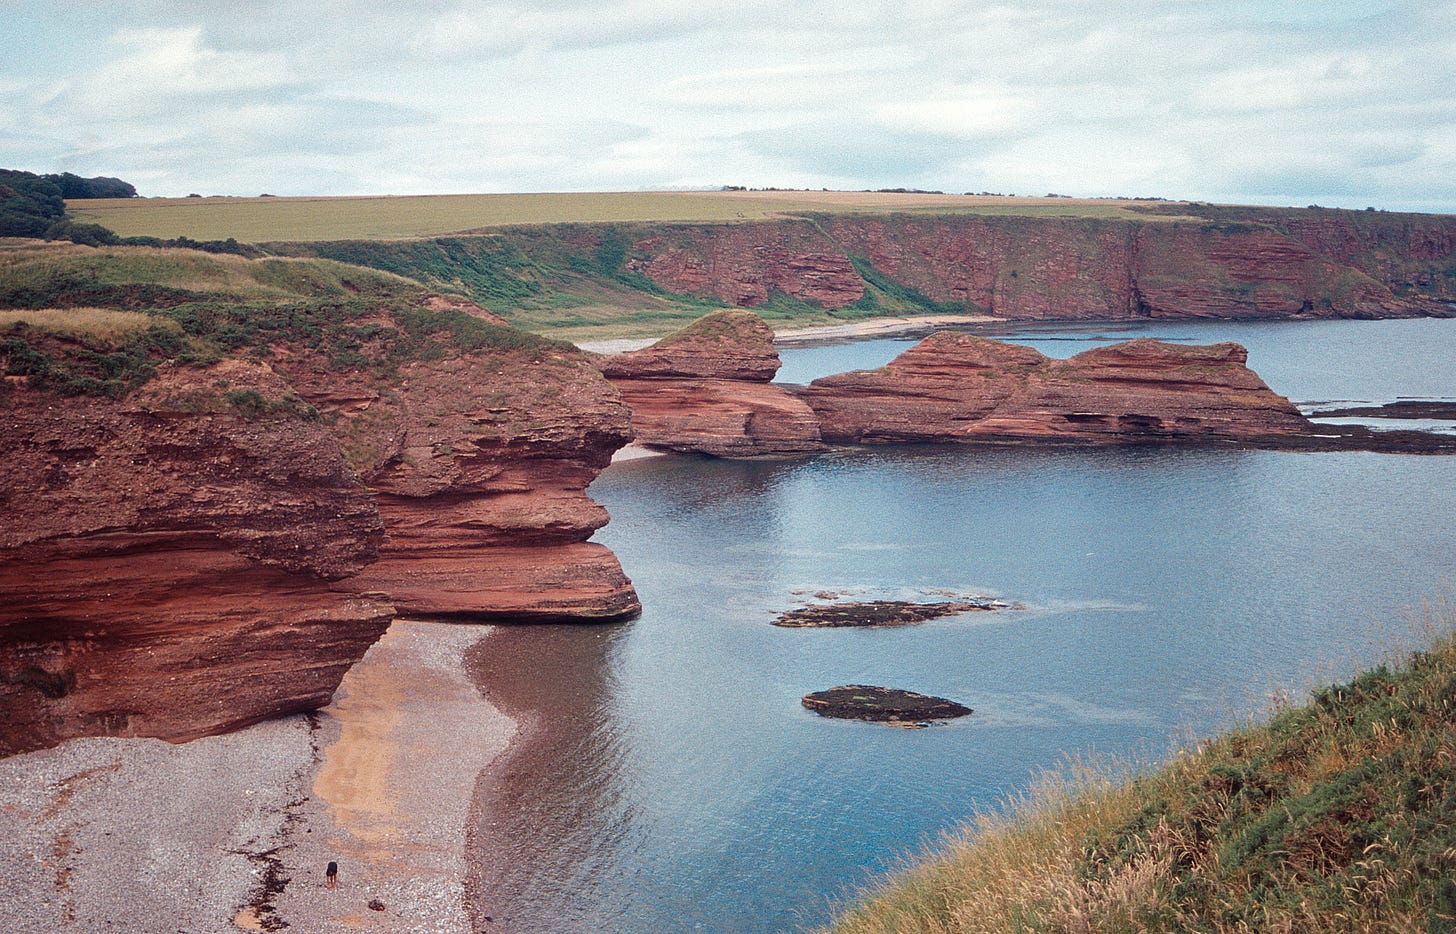 "The Three Sisters", other cliffs and a pebble beach near Arbroath, Scotland